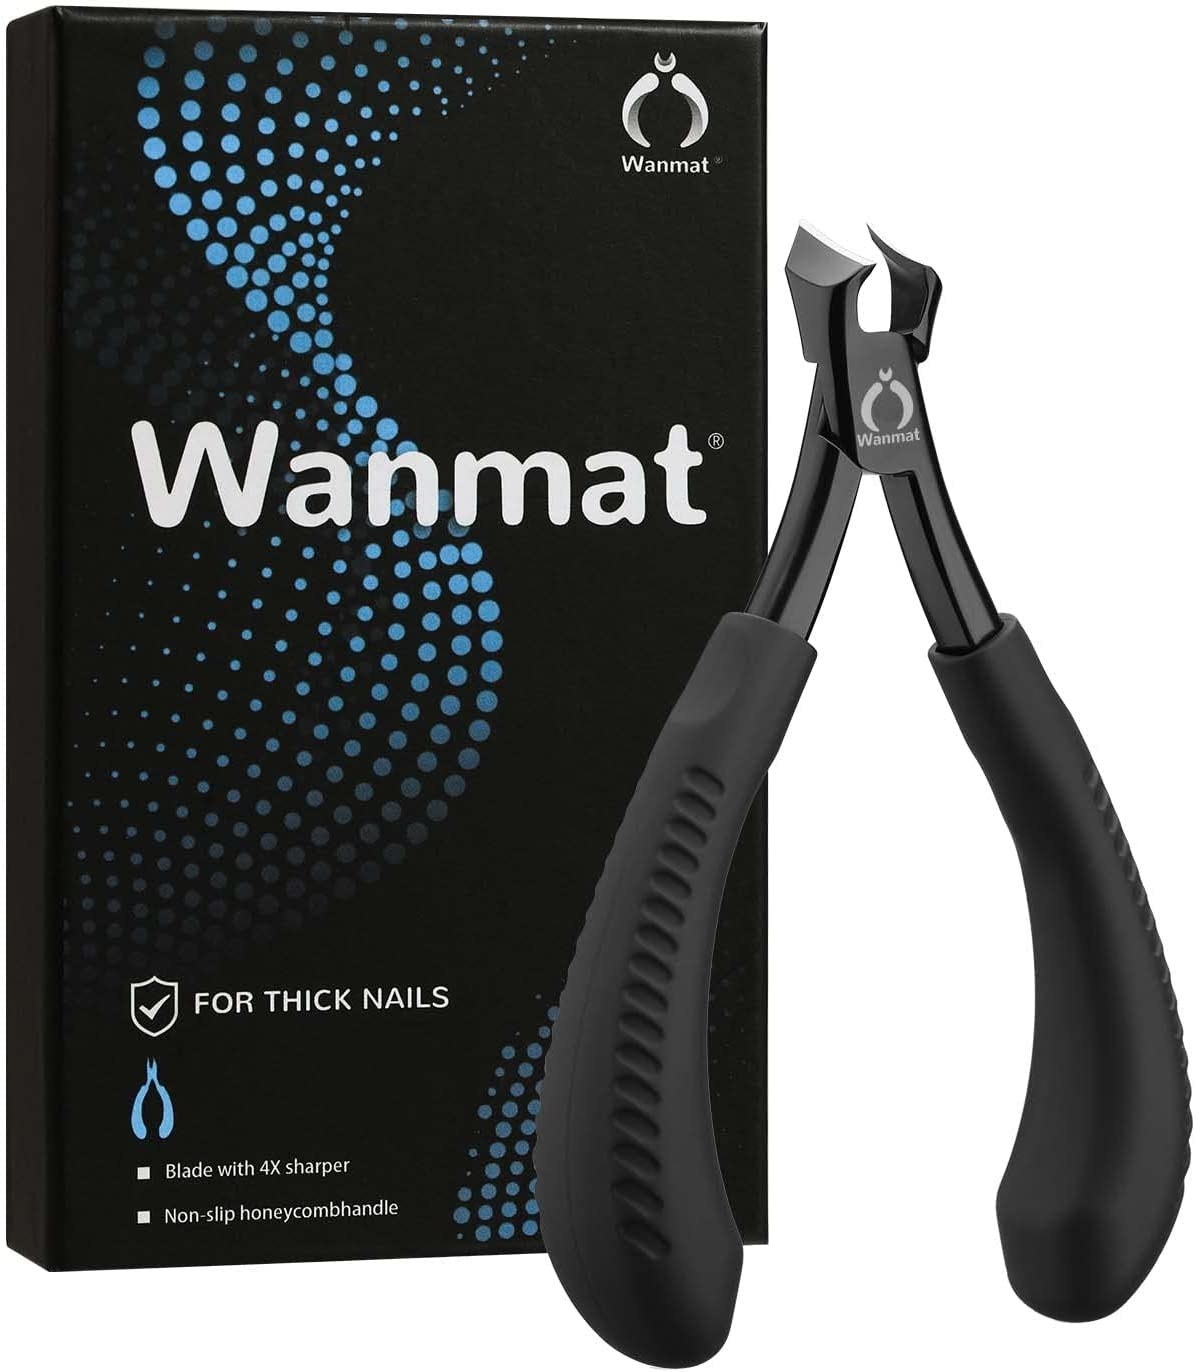 the clippers on a blank background next to its box